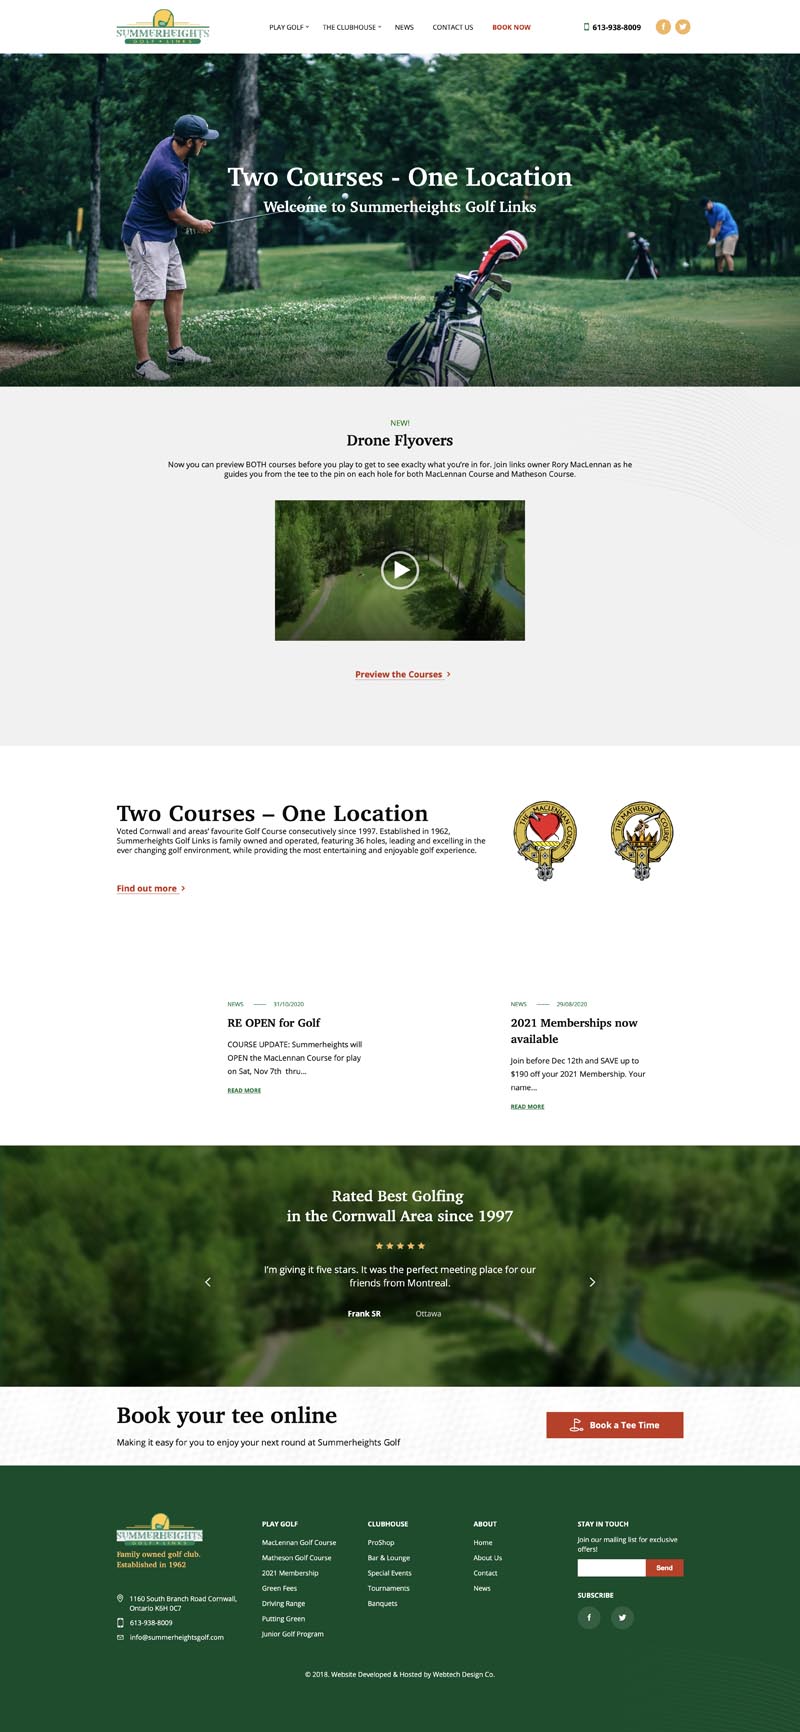 Business website services in Cornwall Ontario for Summerheights Golf Links